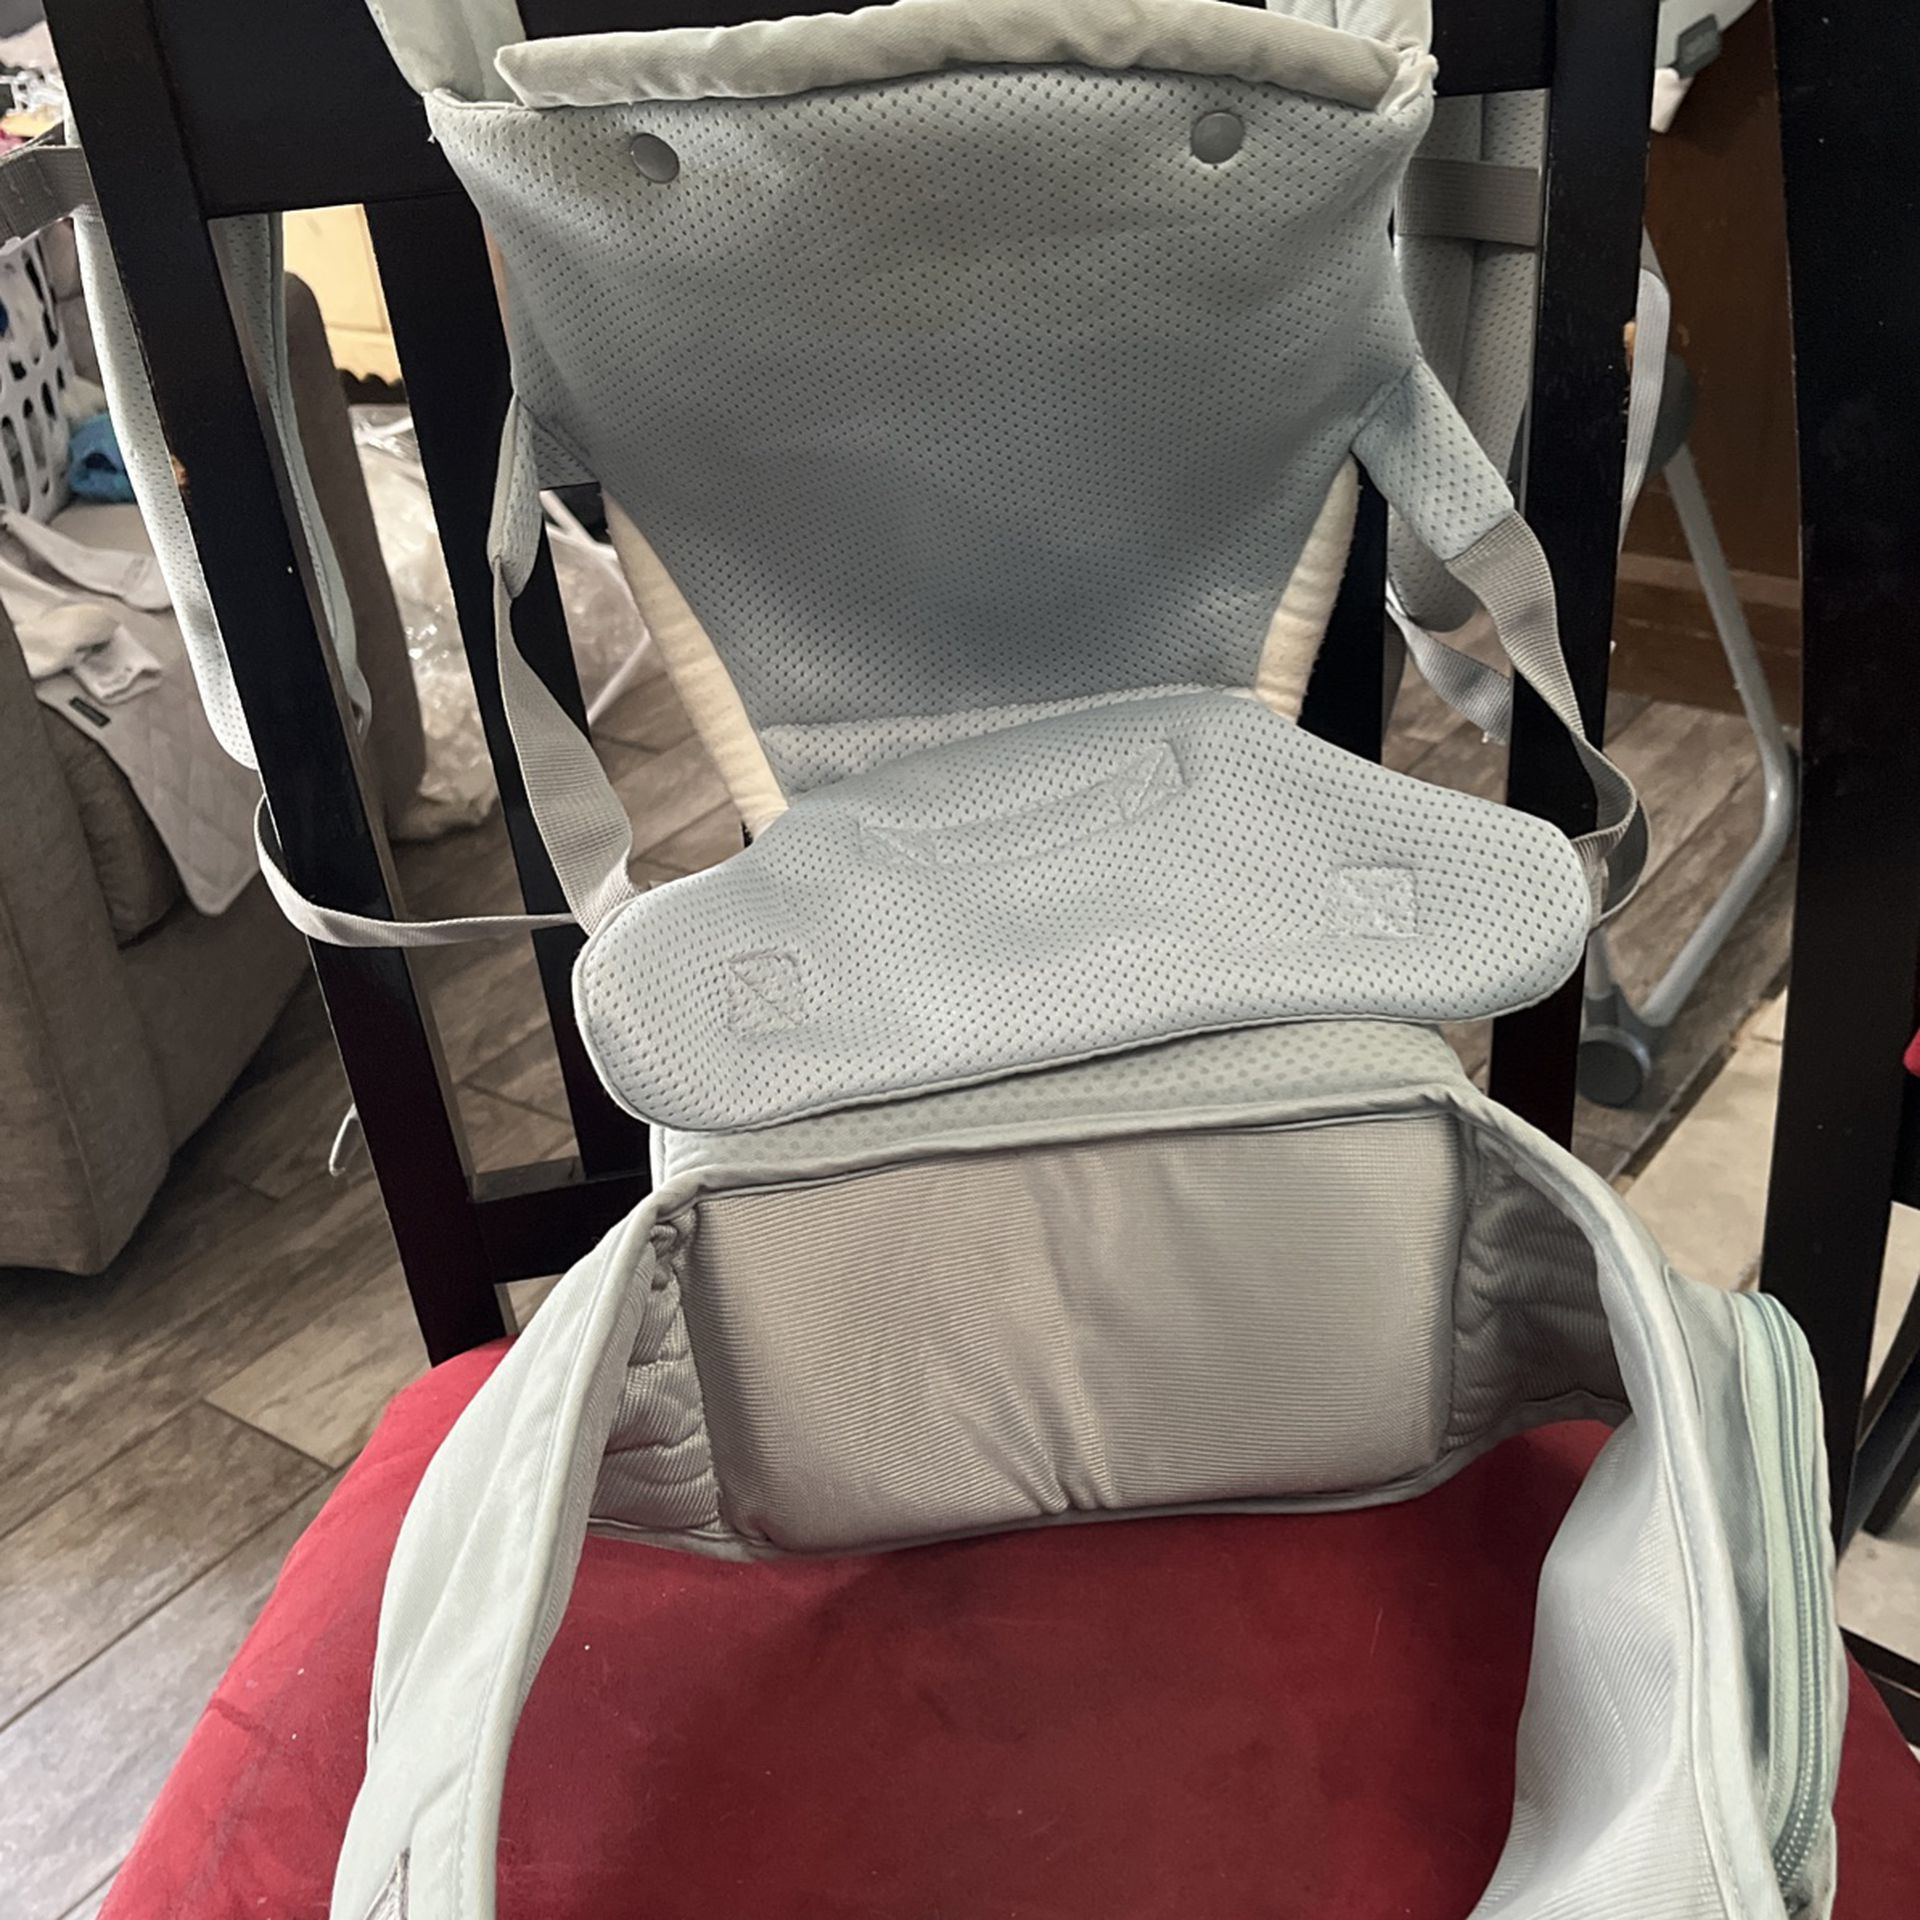 Bable Infant Carrier for Sale in Longwood, FL - OfferUp